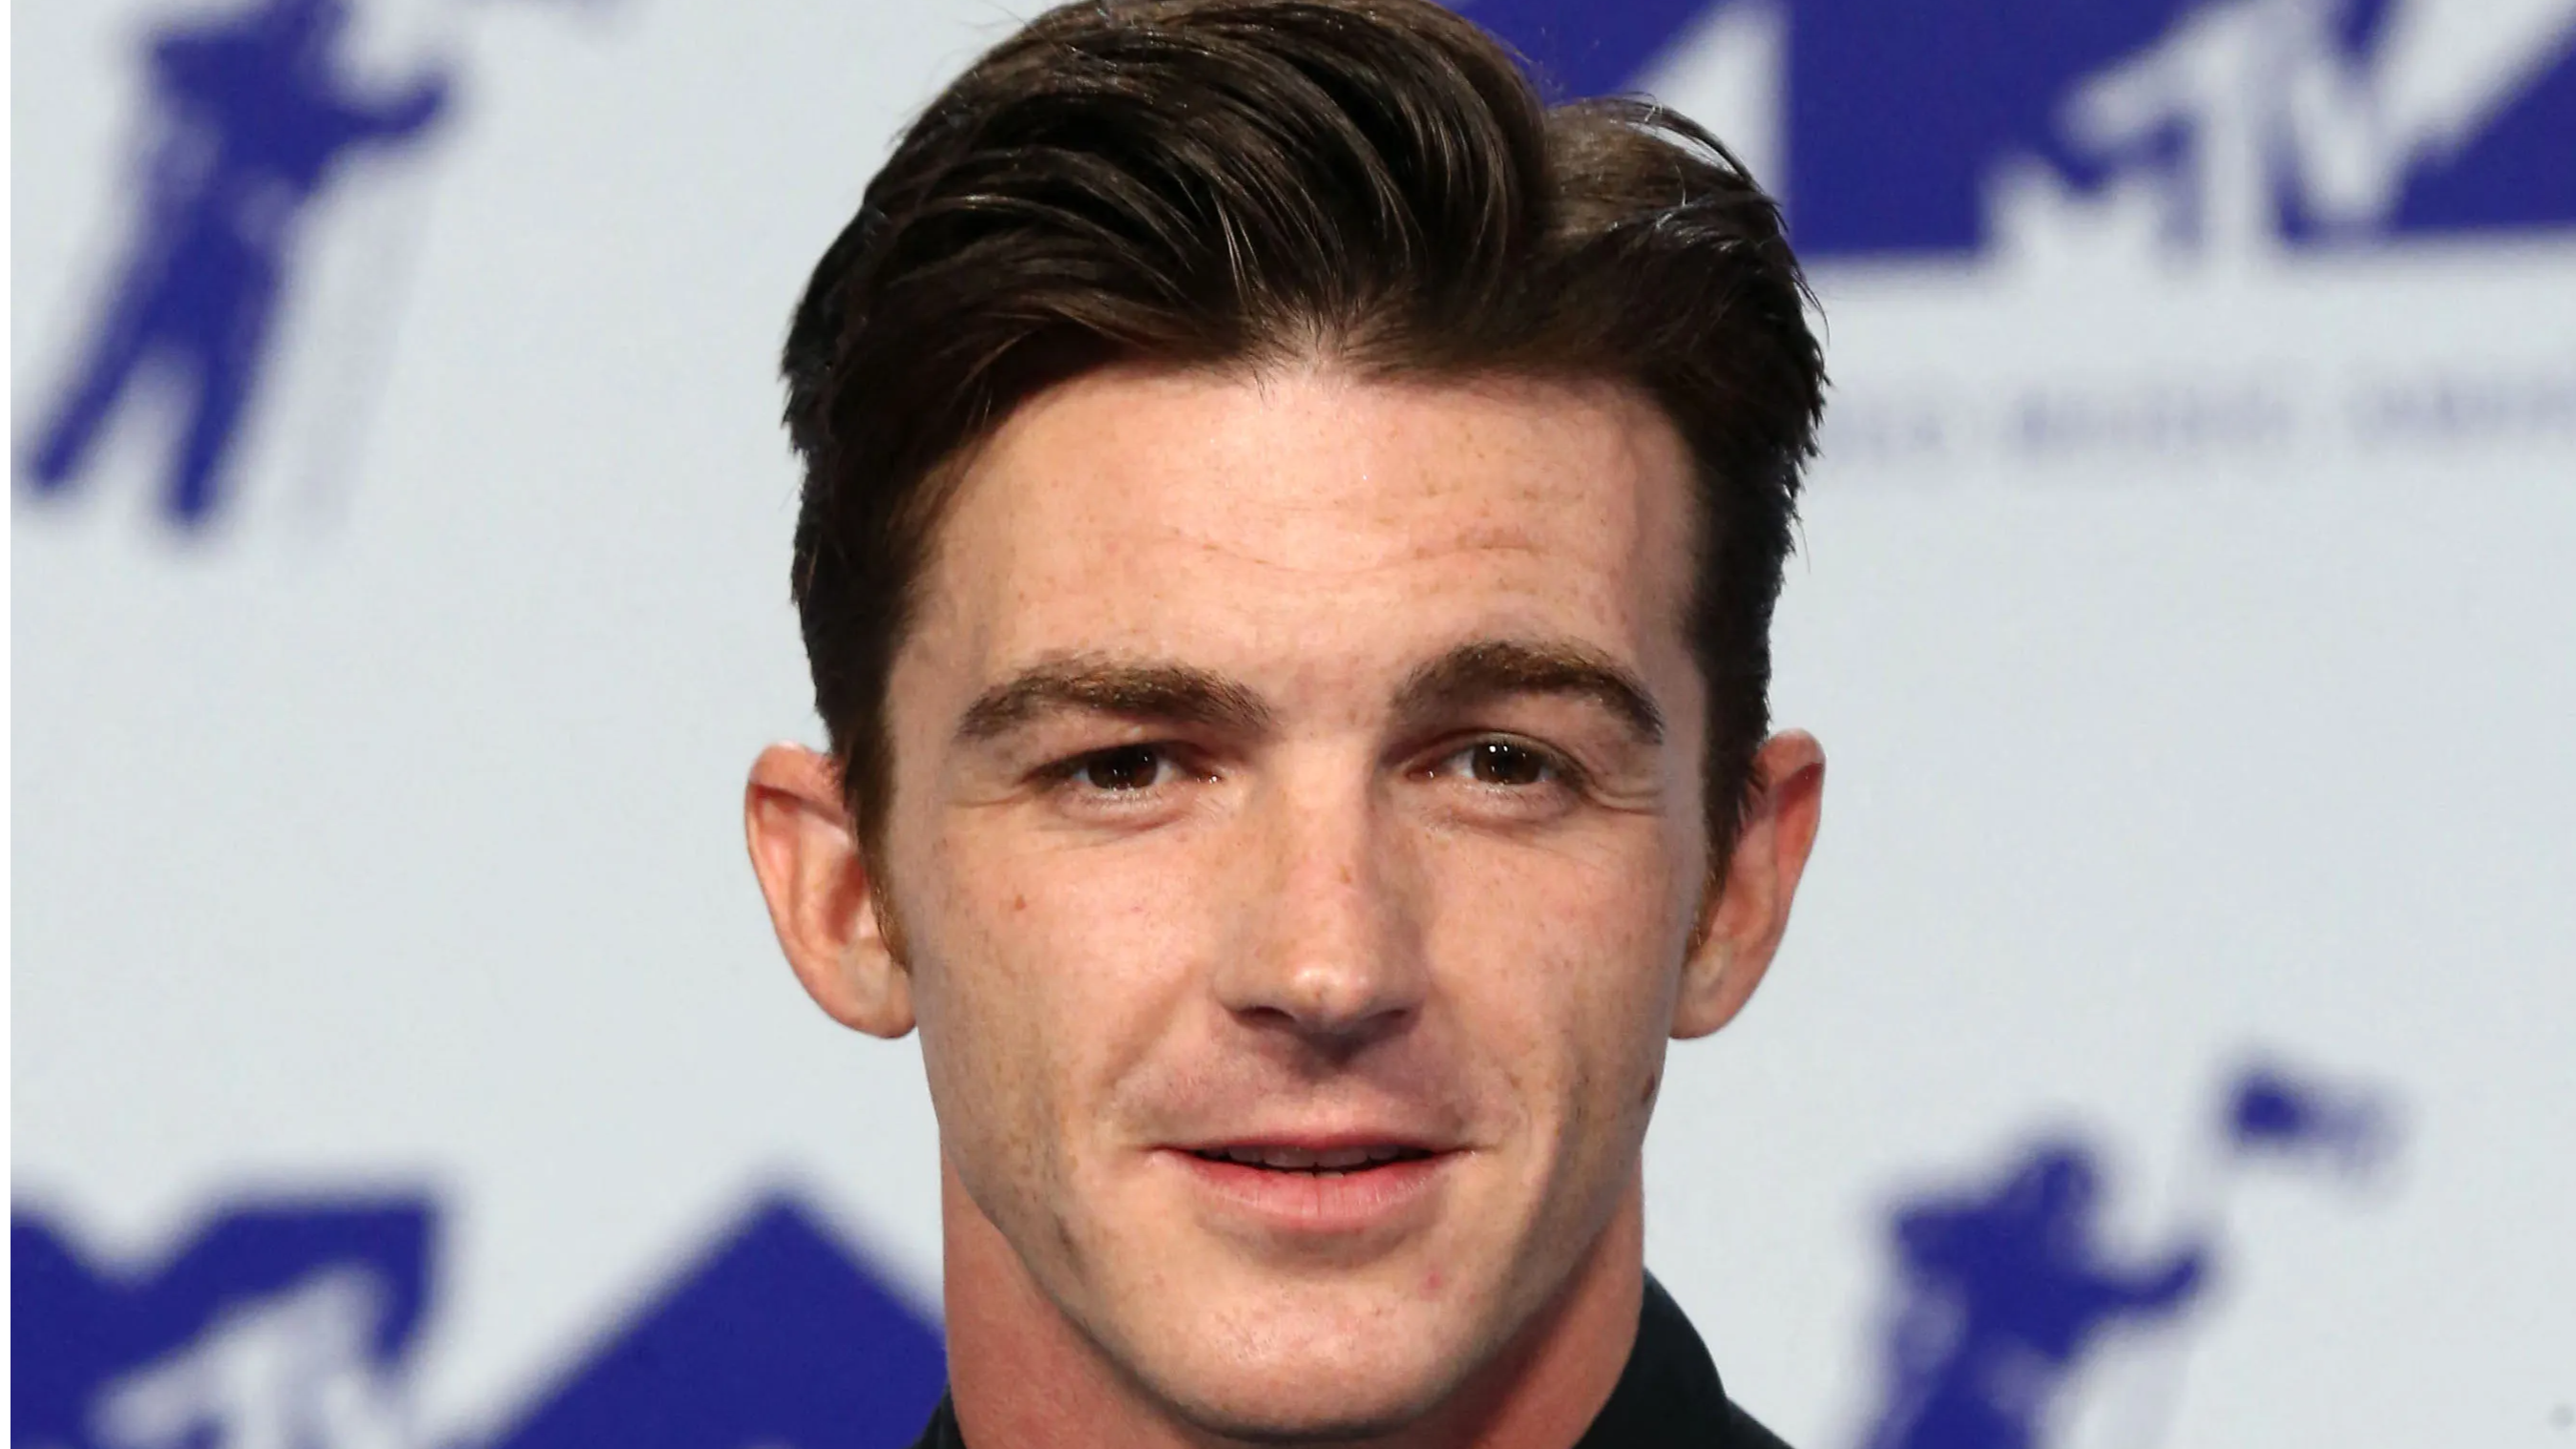 Actor Drake Bell sentenced to 1-year probation for sending sexual texts to a minor